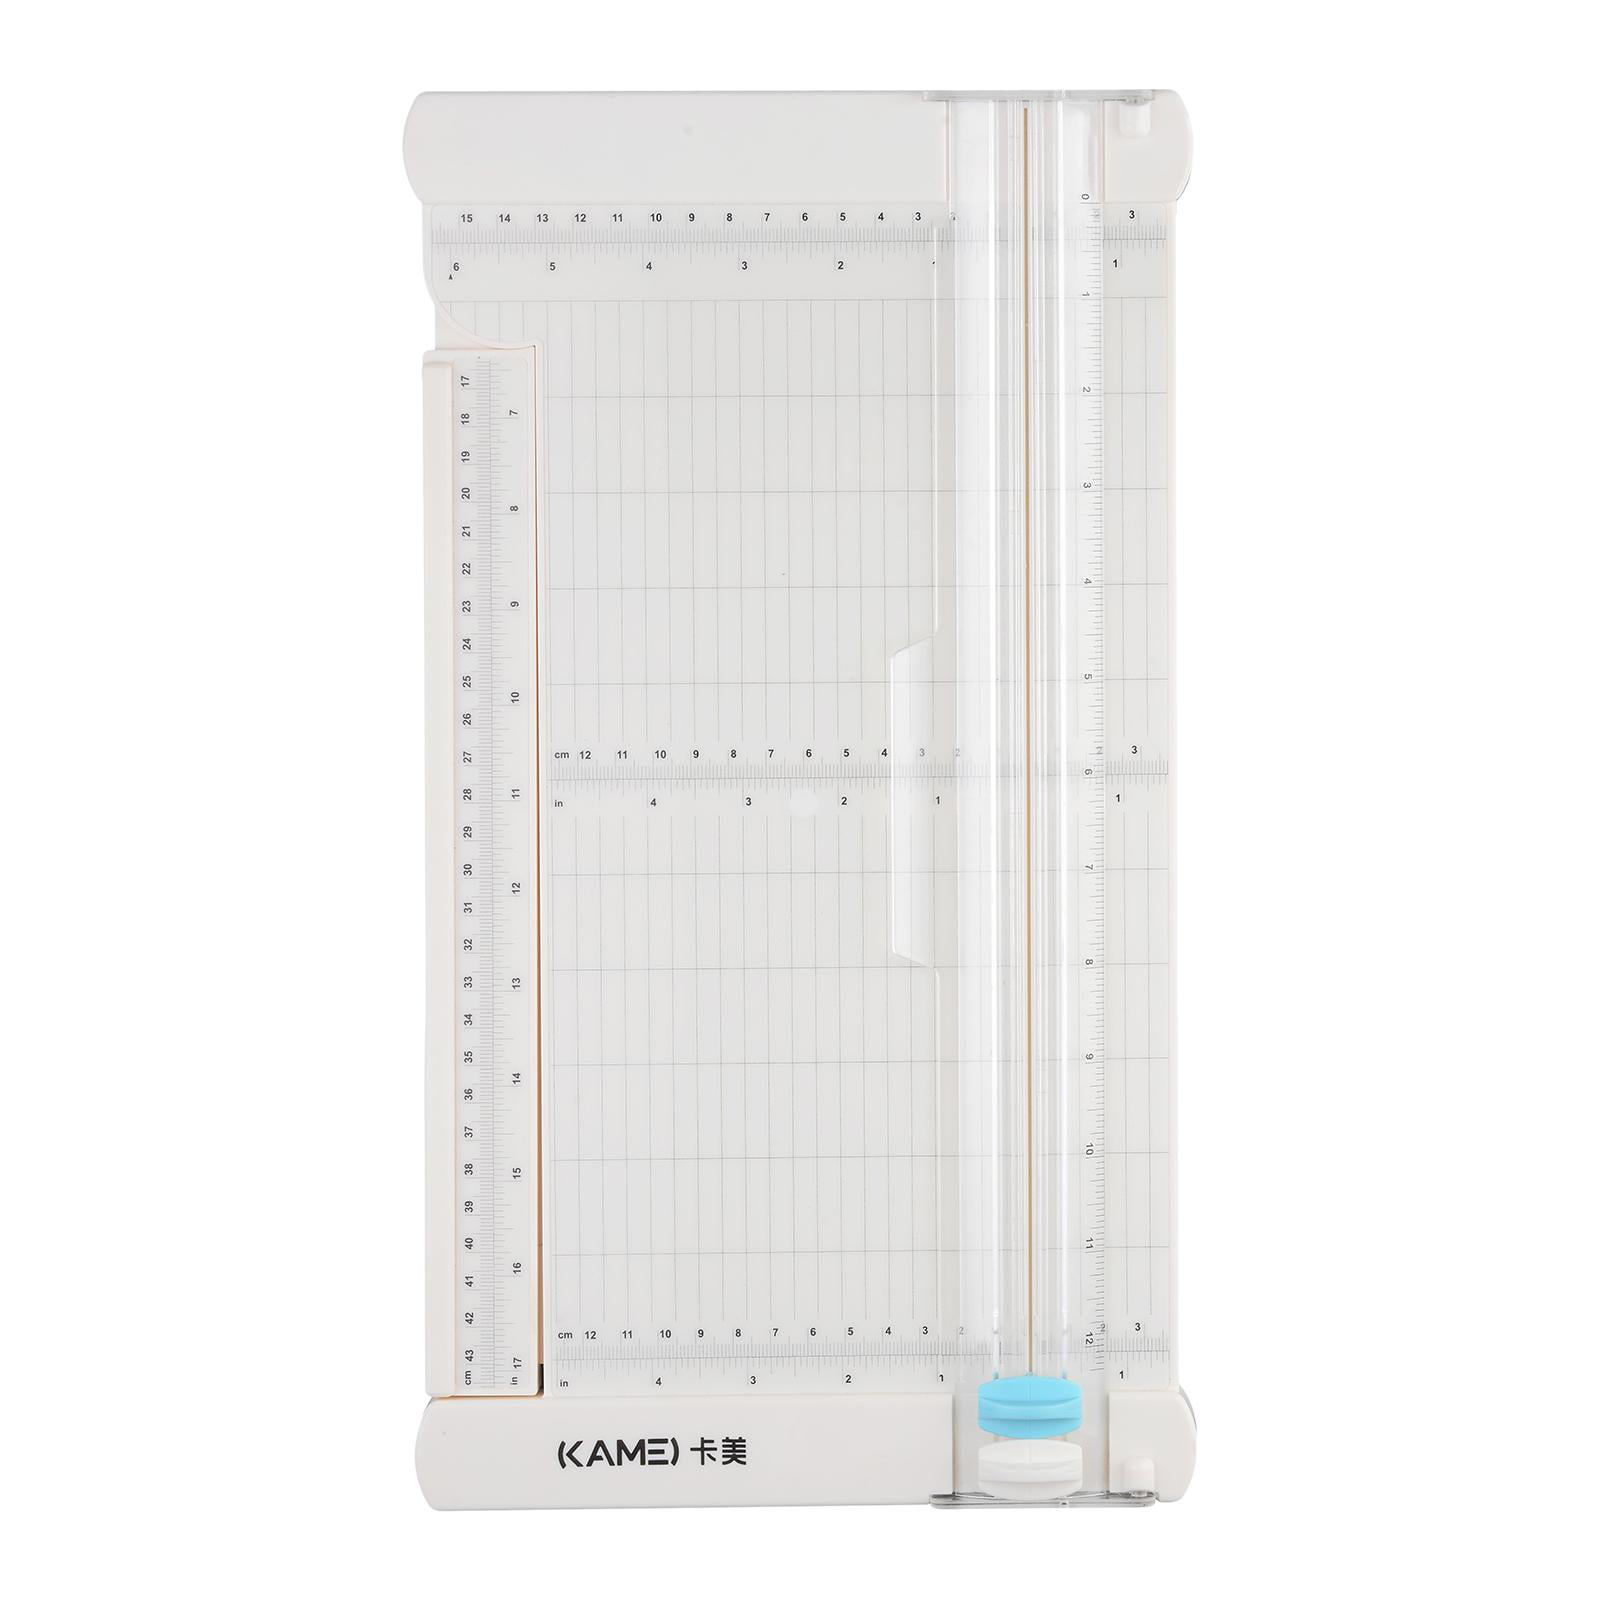 15" A4 Photo Paper Cutter 5 Sheet Guillotine Card Trimmer Ruler Home Office Tool 